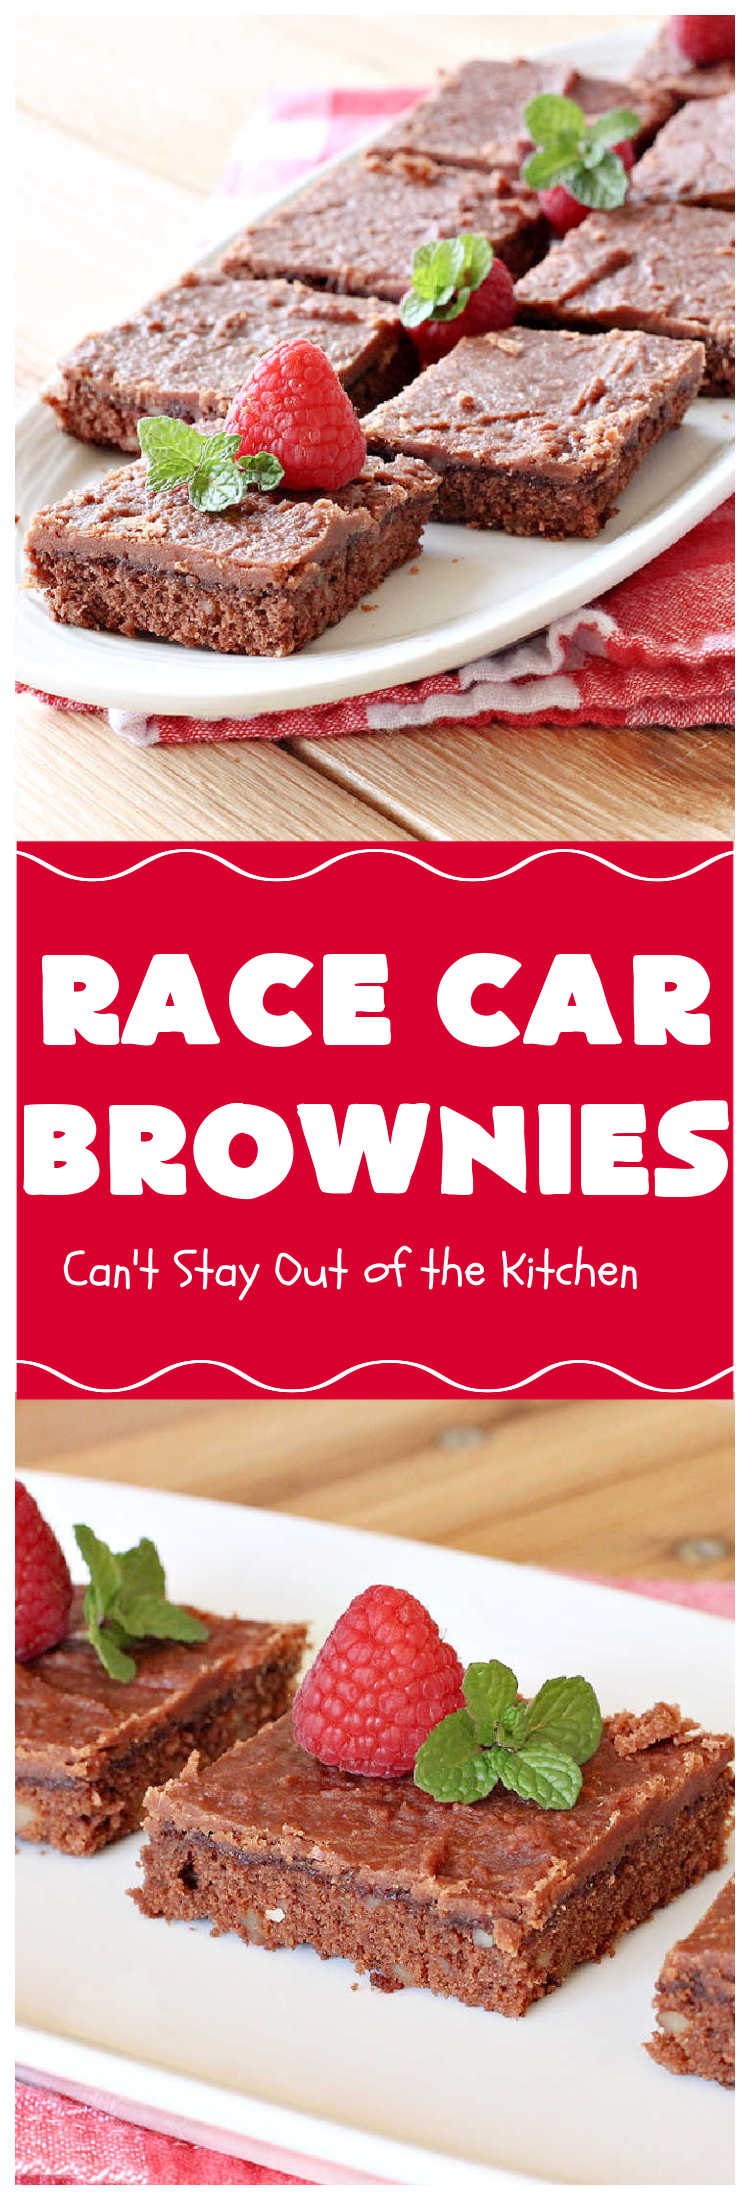 Race Car Brownies | Can't Stay out of the Kitchen | these rich, decadent #brownies are perfect for #NASCAR races, potlucks, soccer games, #tailgating or backyard barbecues. They have a rich, fudgy icing on top & they're made with #Hersheys #chocolate syrup. So delicious. #ChocolateDessert #NASCARDessert #dessert #Easter #EasterDessert #RaceCarBrownies